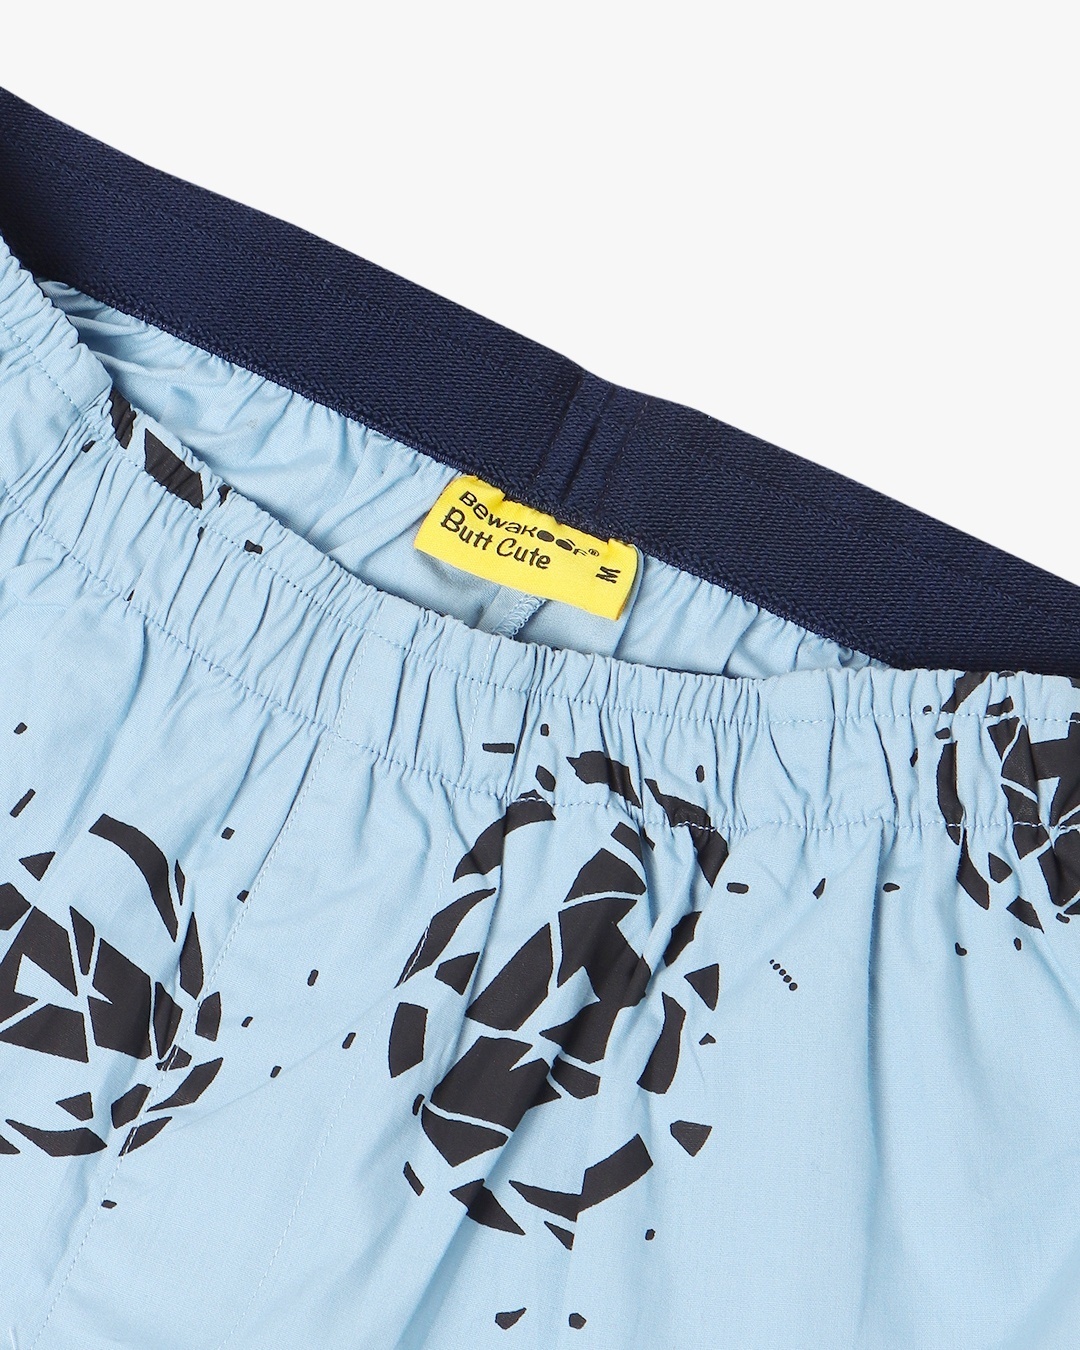 Shop Men's Blue Avengers All Over Printed Boxers